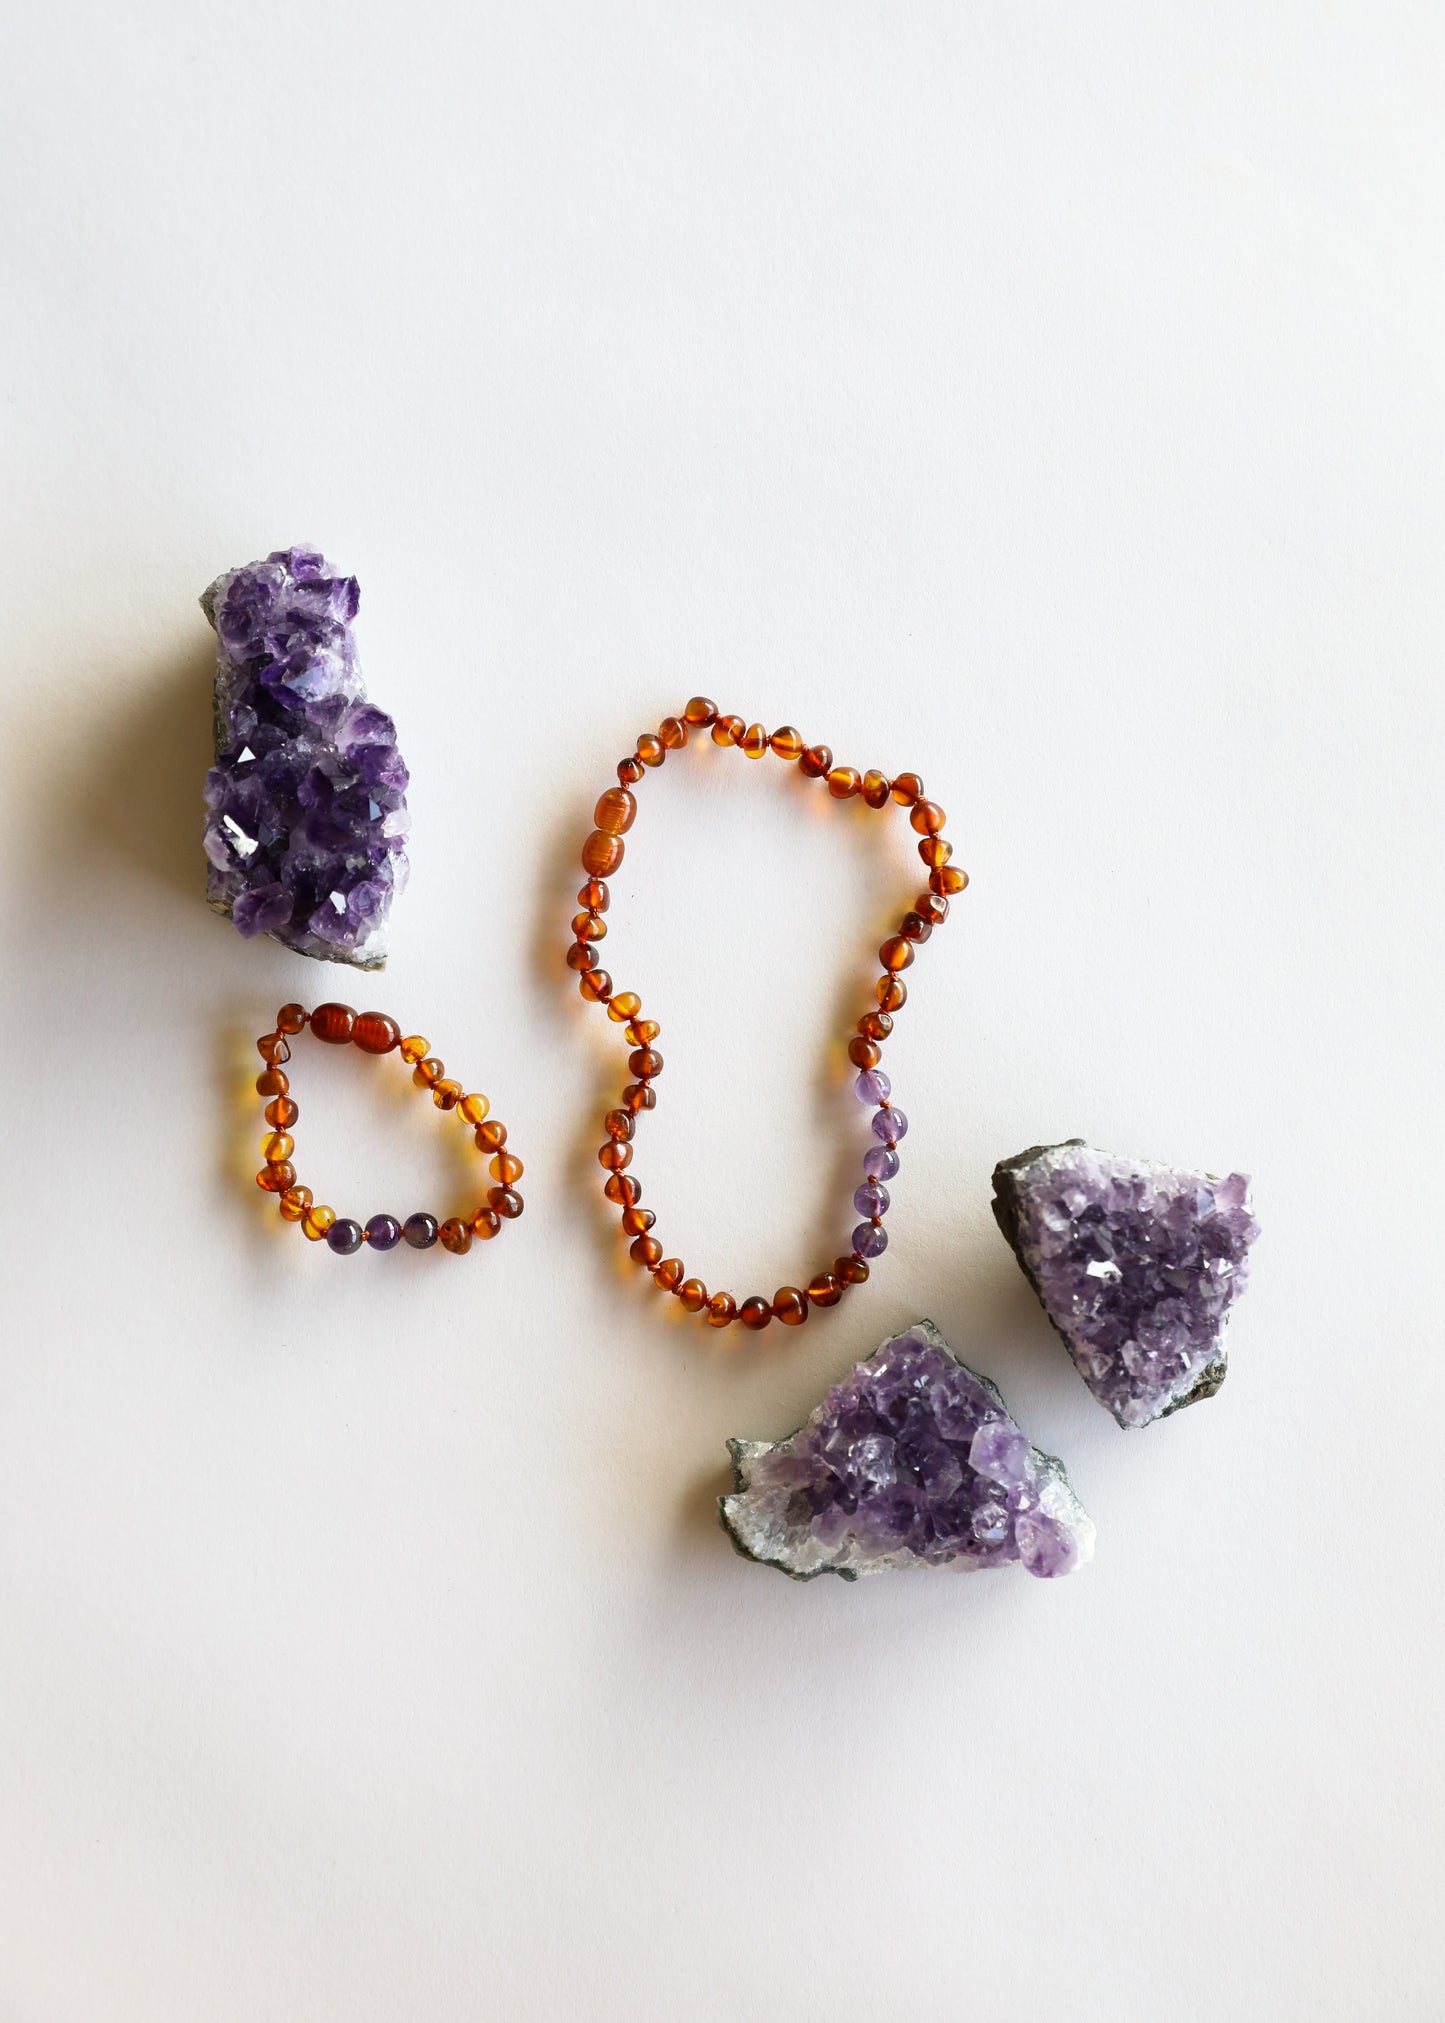 Polished Cognac Baltic Amber + Amethyst || Necklace